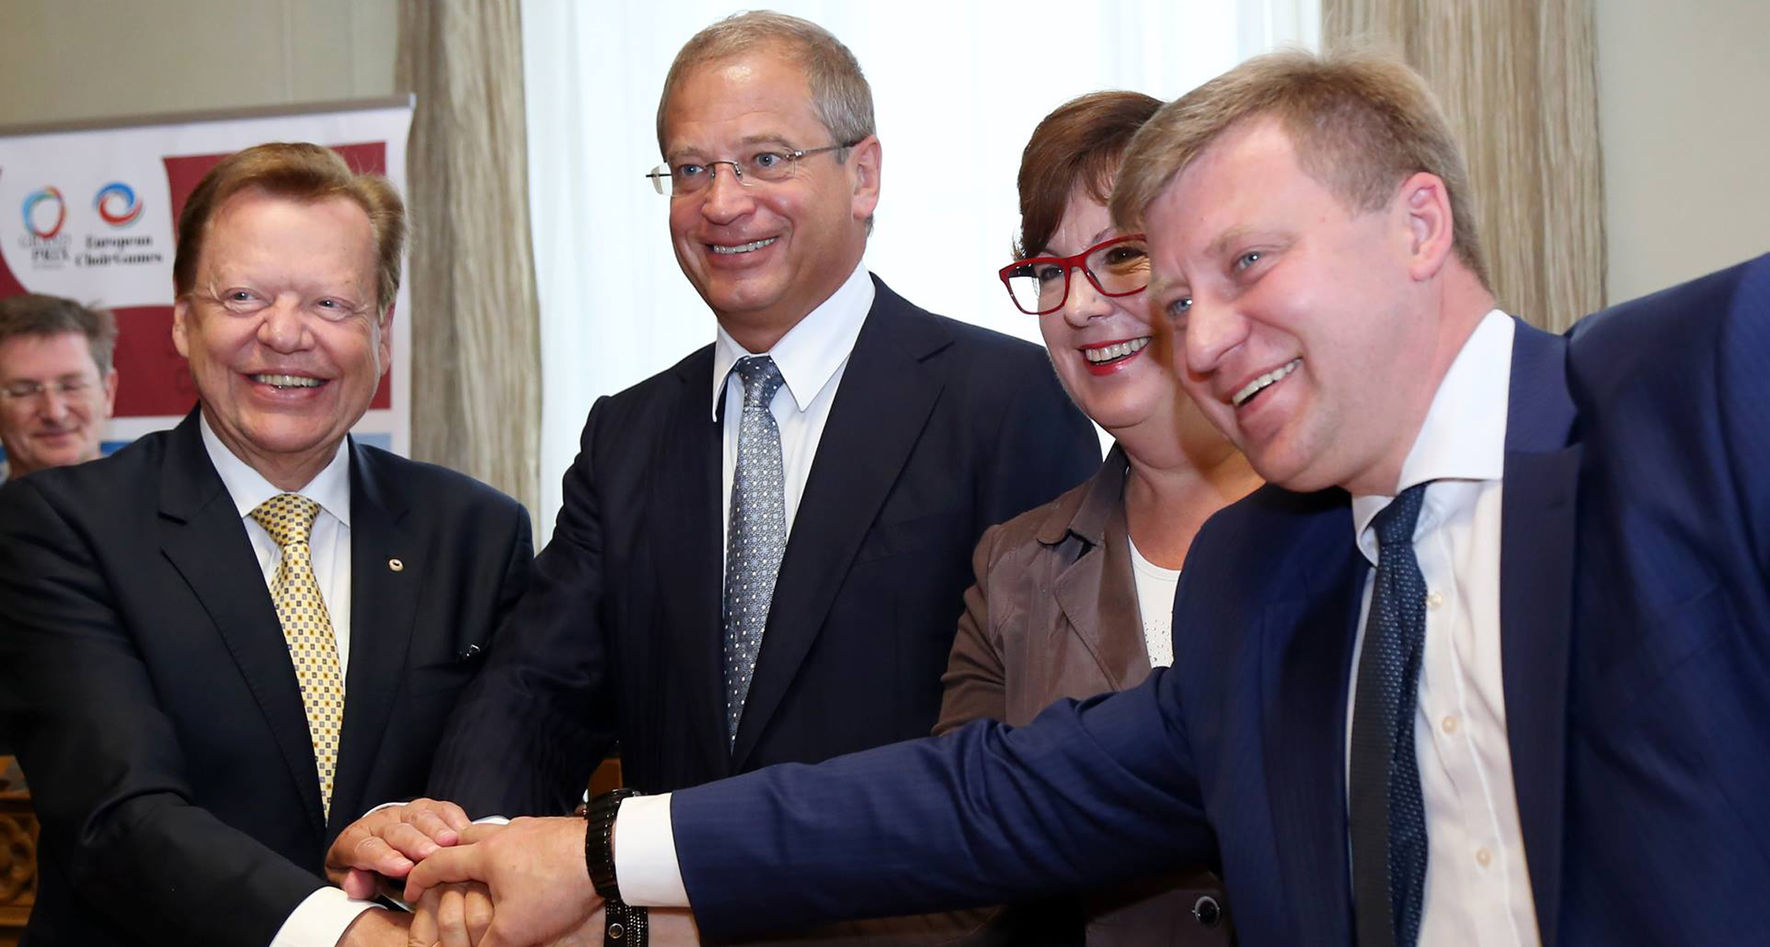 Signing of the contract in Riga